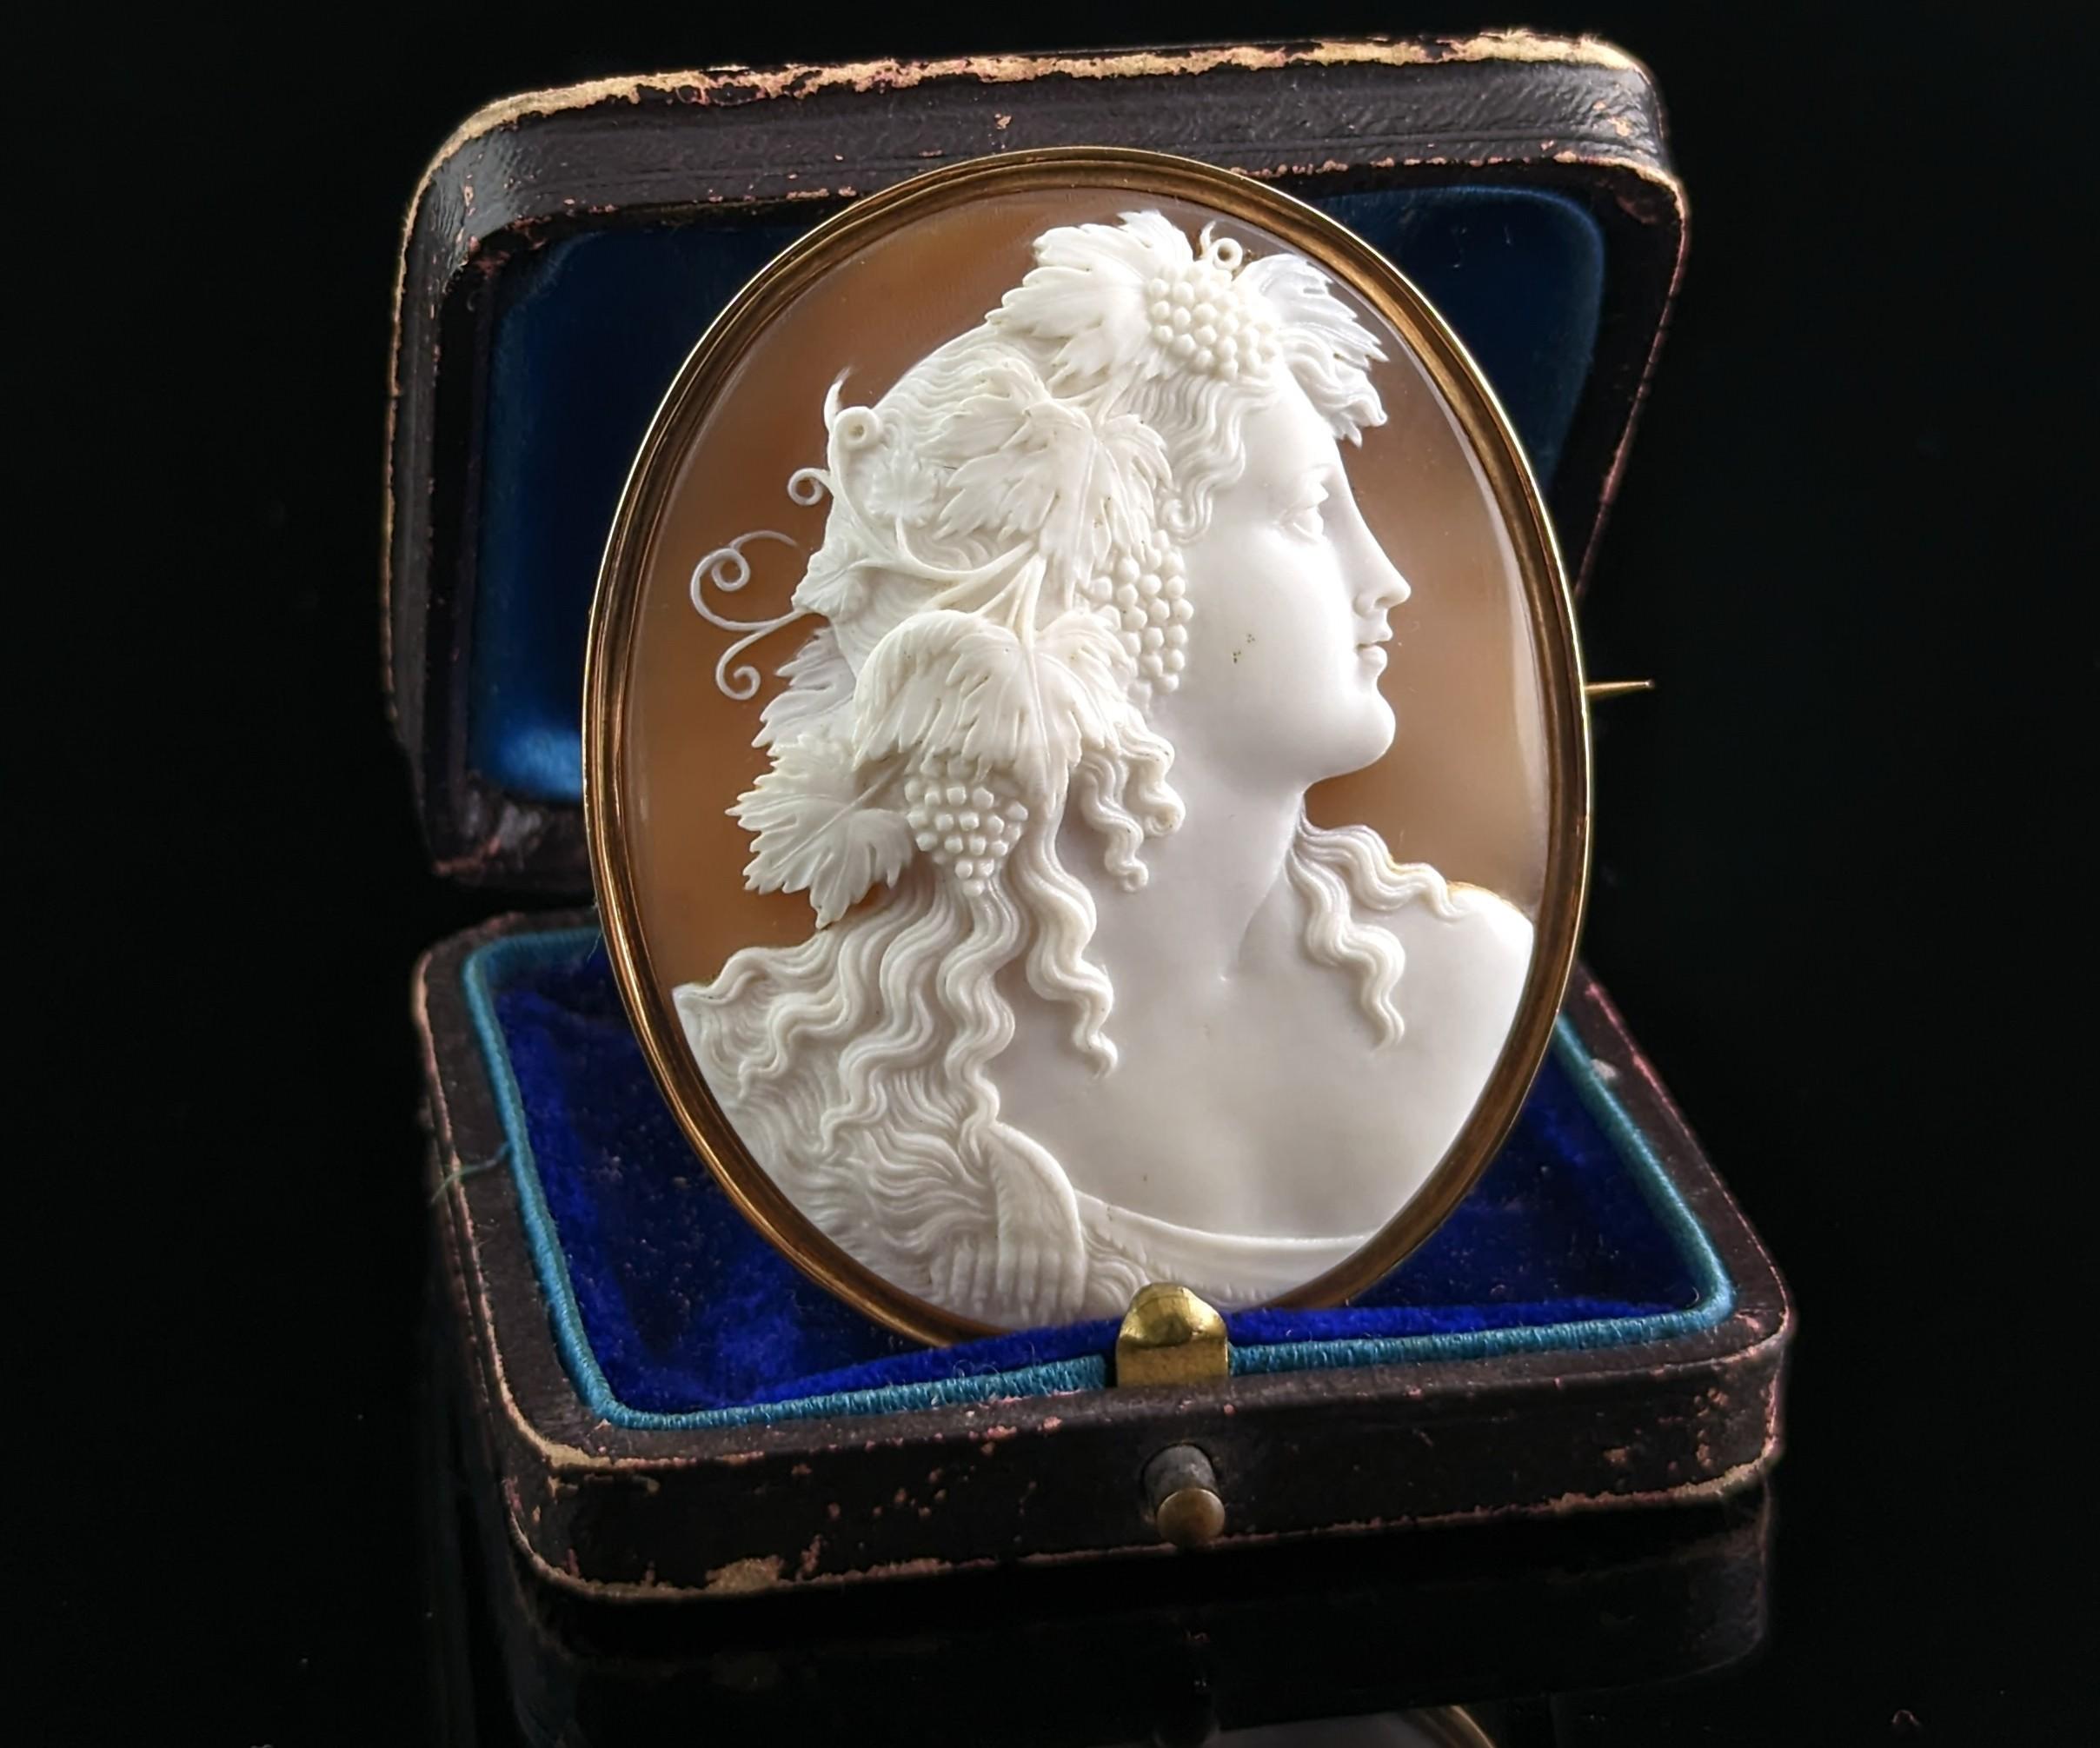 This is an exceptionally fine antique Victorian era cameo brooch pendant! If you are a fan or collector of cameos then you will know how hard these finer carvings are to find

A very nicely carved bullmouth shell cameo depicting a Bacchante housed